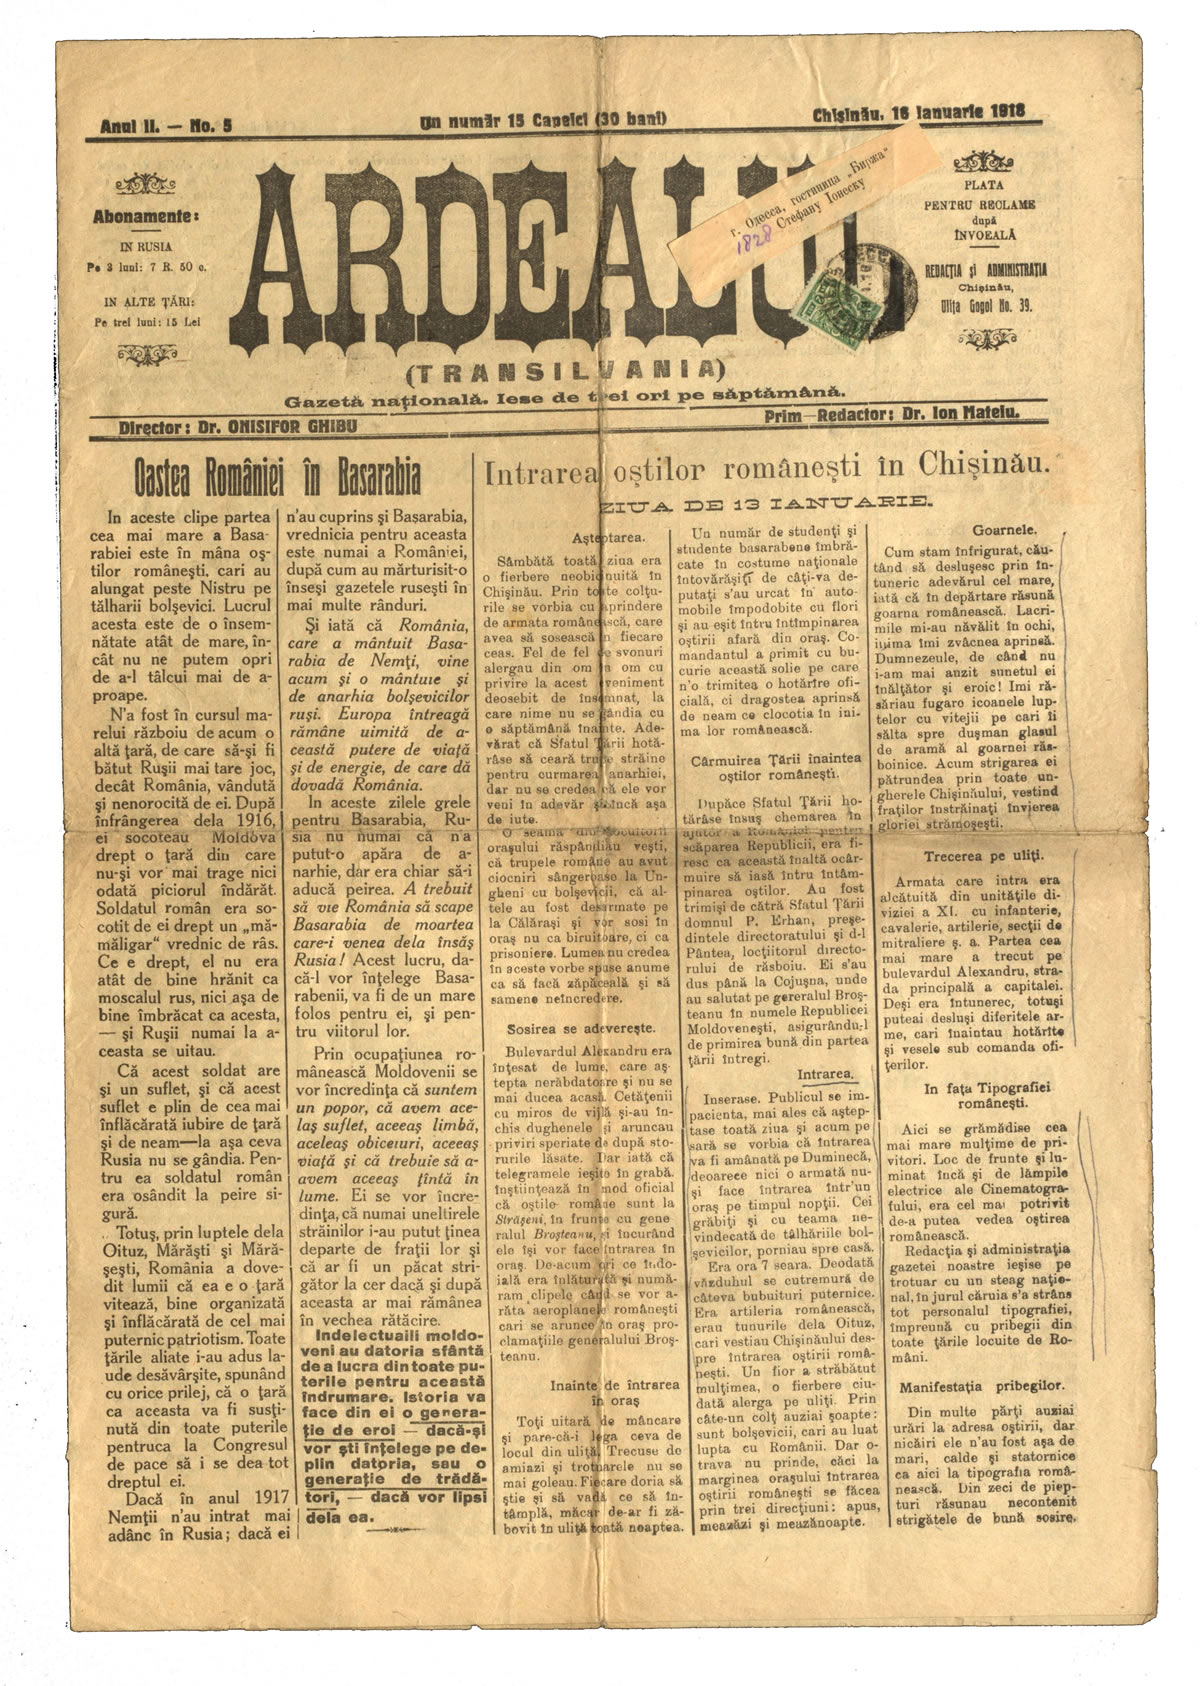 The newspaper "Ardealul" from January 16, 1918, reports about the entrance of the Romanian troops in Chisinau (MNIR) 